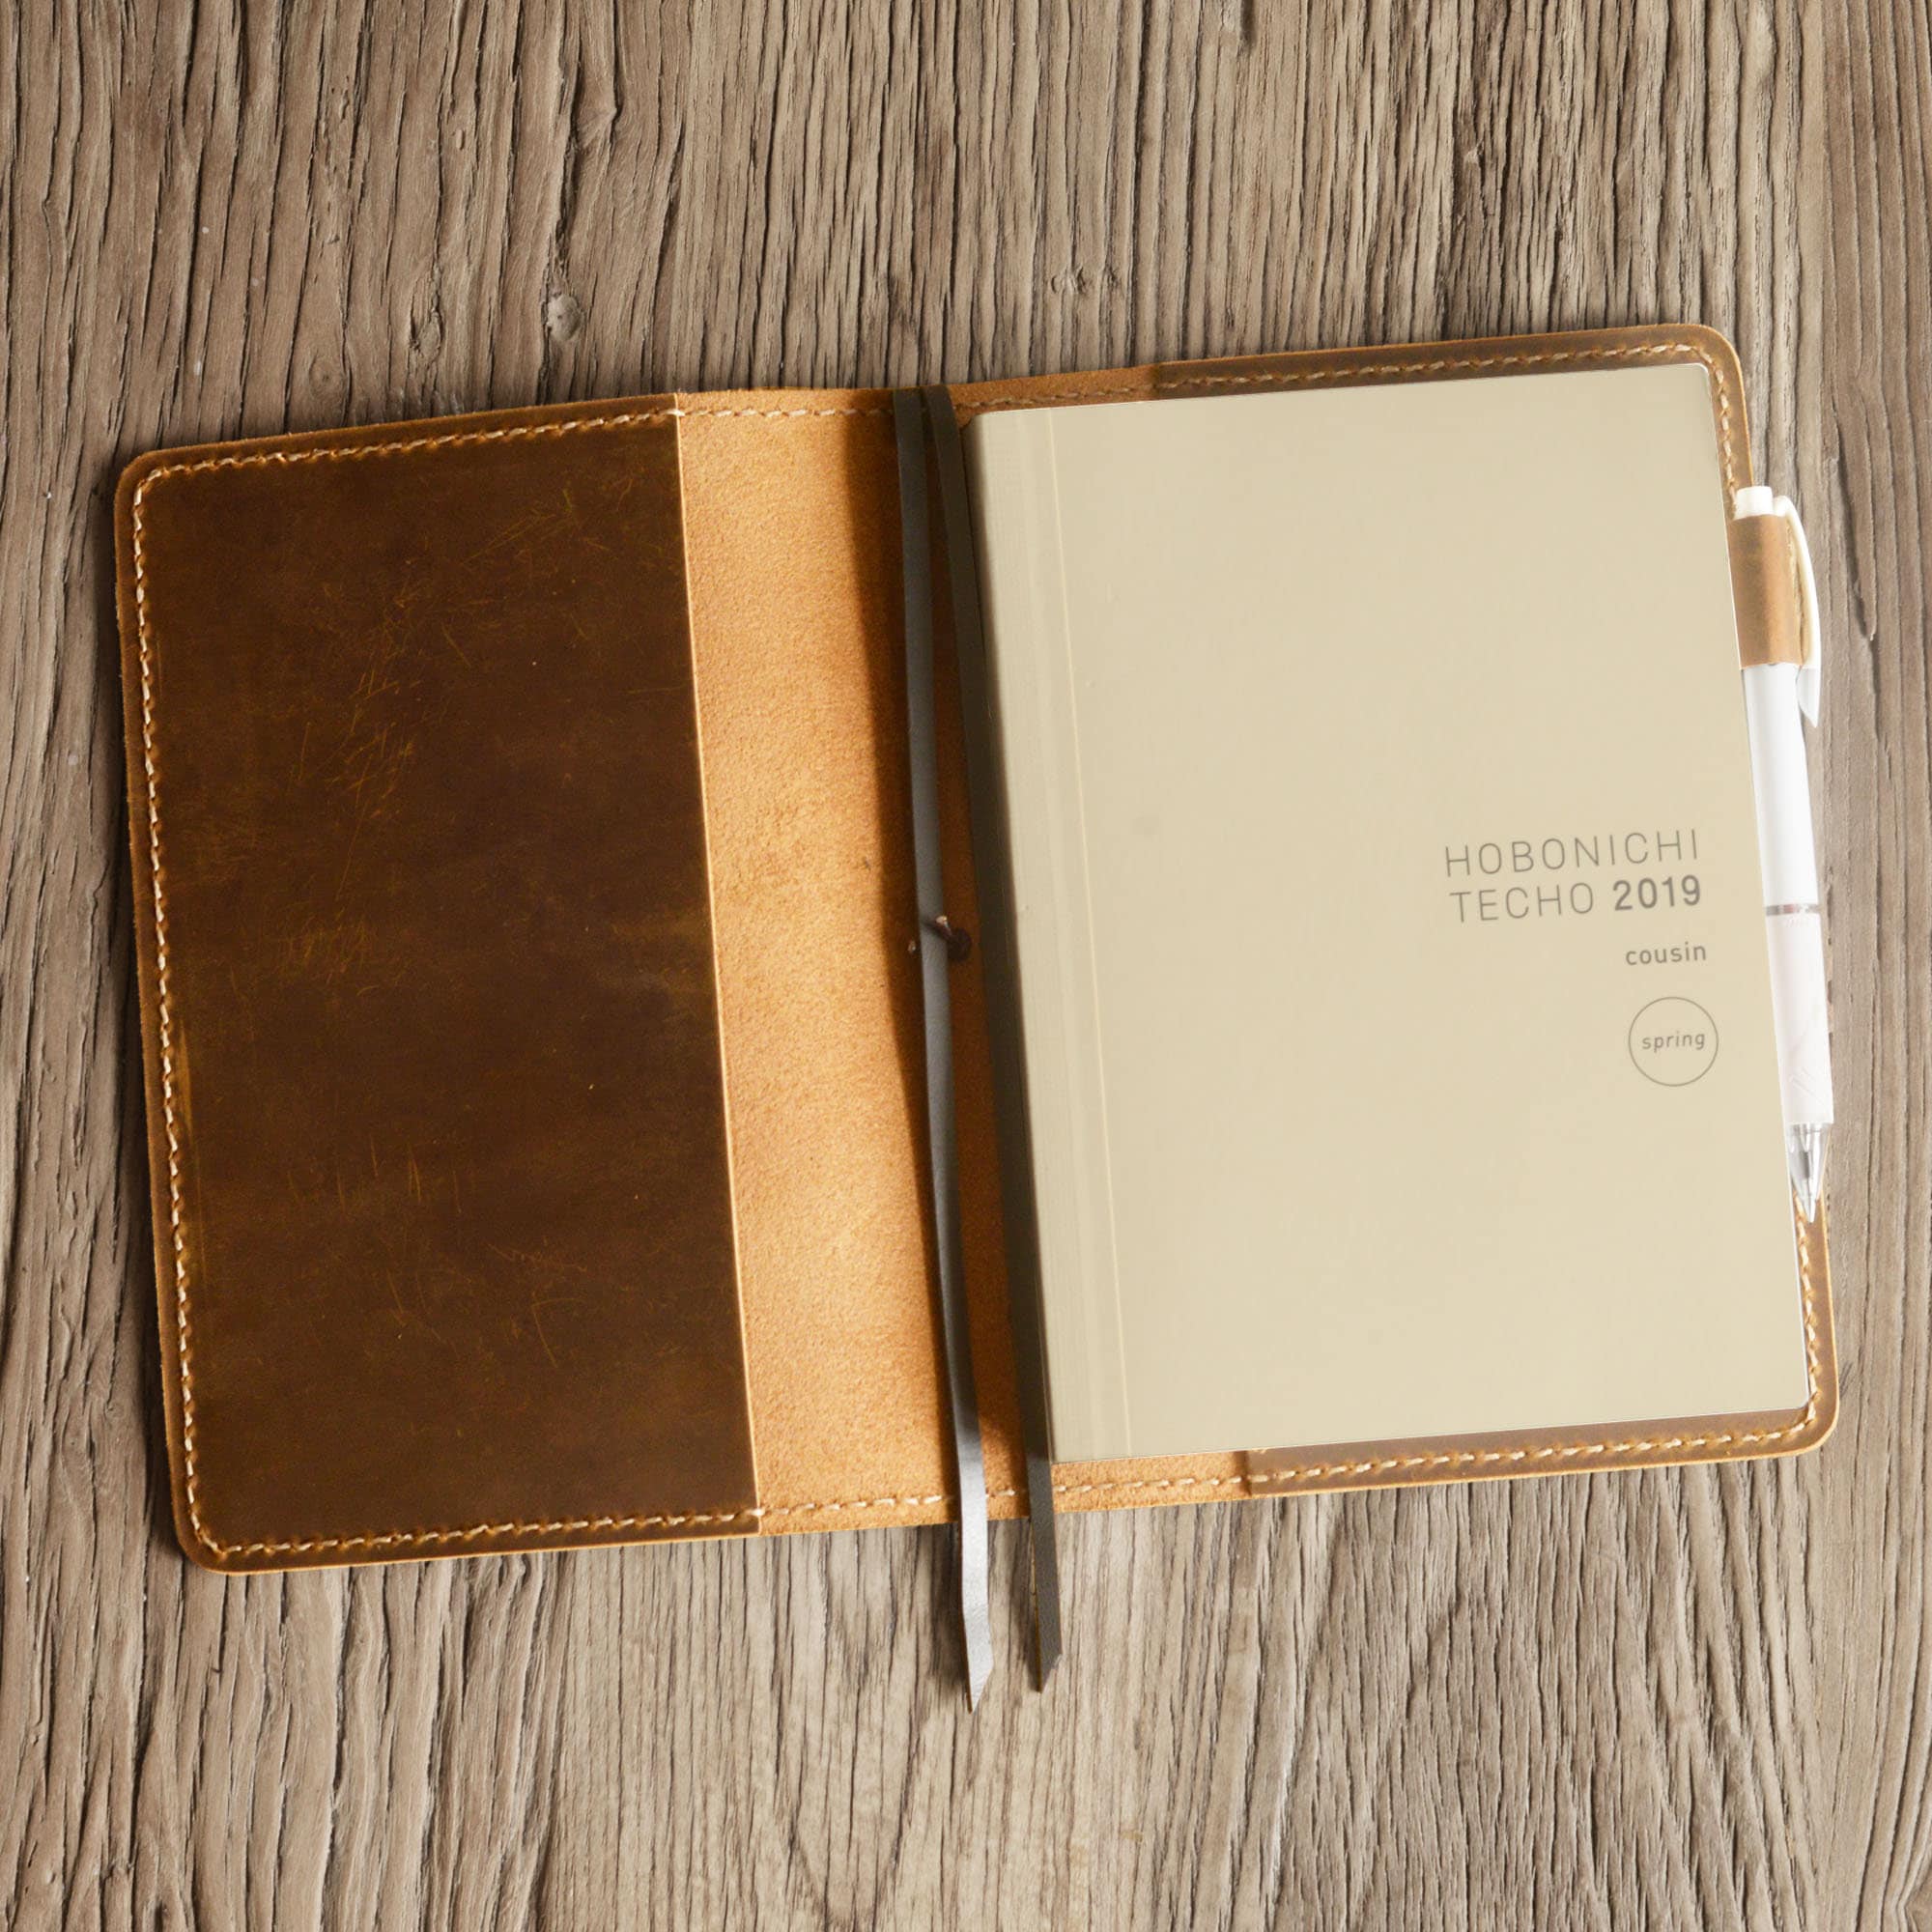 Hobonichi A5 / A6 Cousin Cover Hobonichi techo cousin cover with